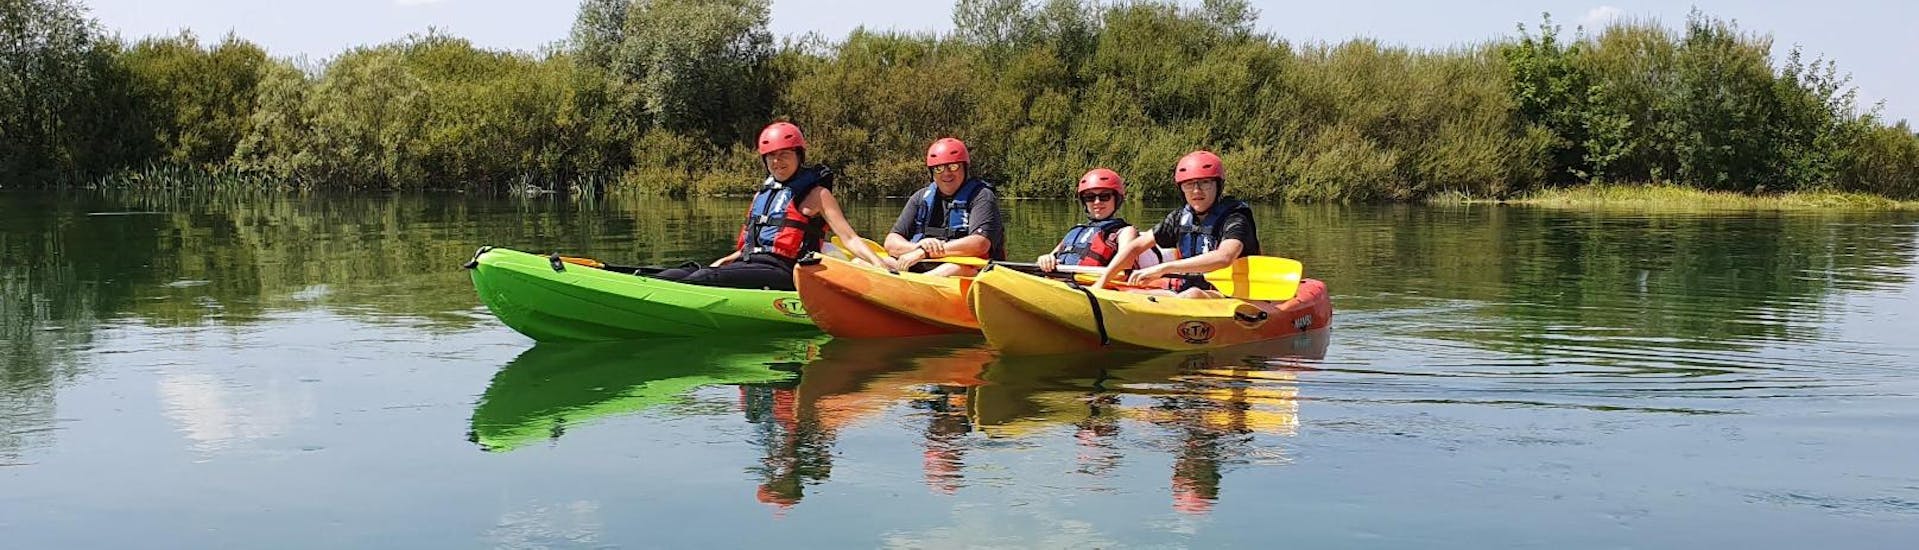 A group of friends is relaxing on Cetina River during the Kayak Safari "Cetina River" - Sinj organised by Hotel Alkar.